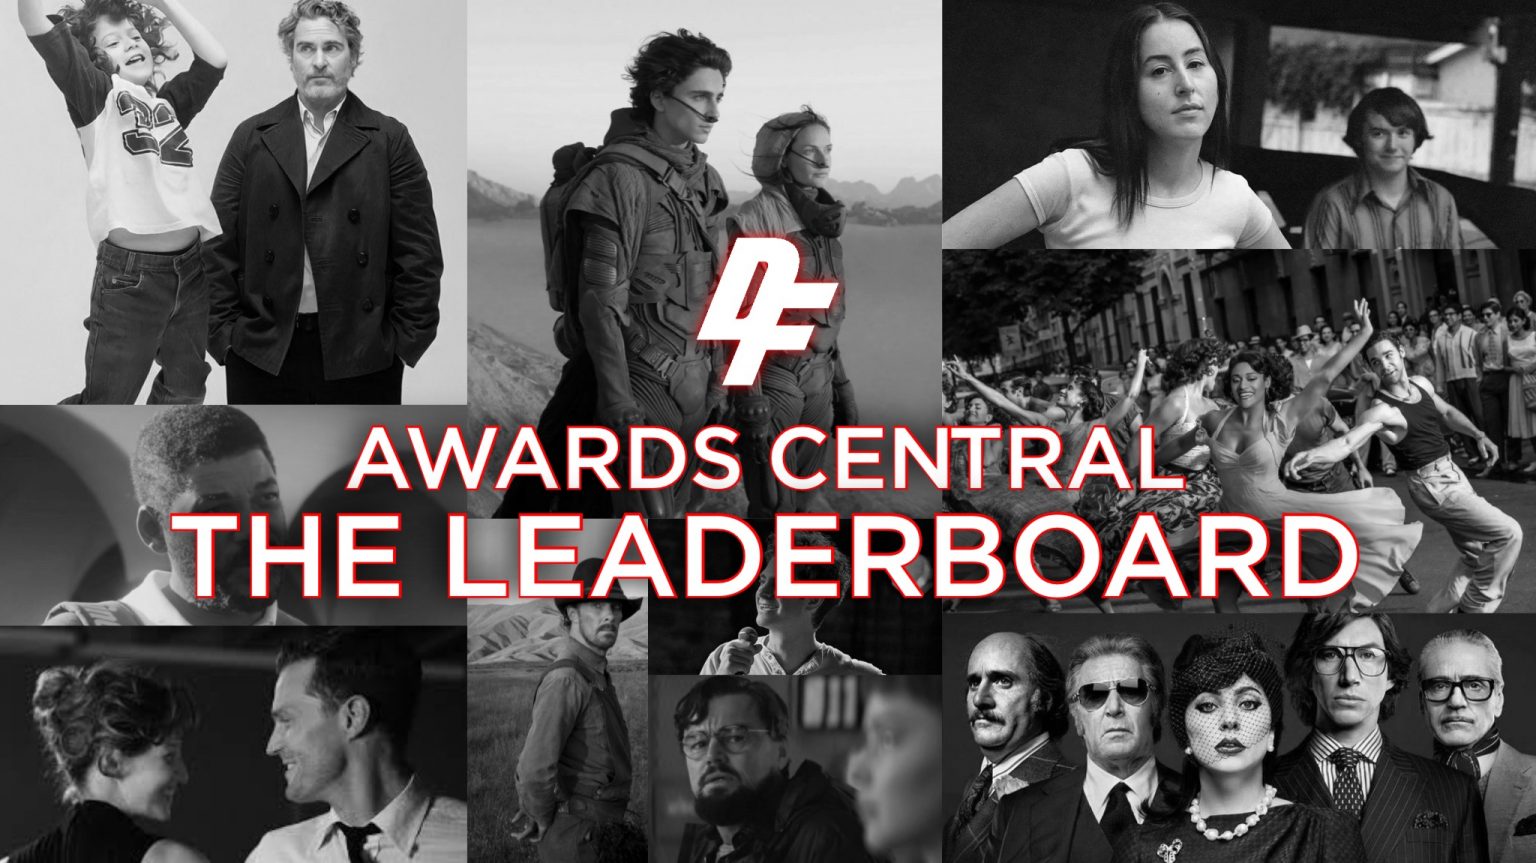 A collage of potential 2022 Oscar contenders like DUNE, LICORICE PIZZA, HOUSE OF GUCCI, BELFAST, KING RICHARD, SPENCER, WEST SIDE STORY and more for the DiscussingFilm leaderboard of updated predictions, part of the DF Awards Central.